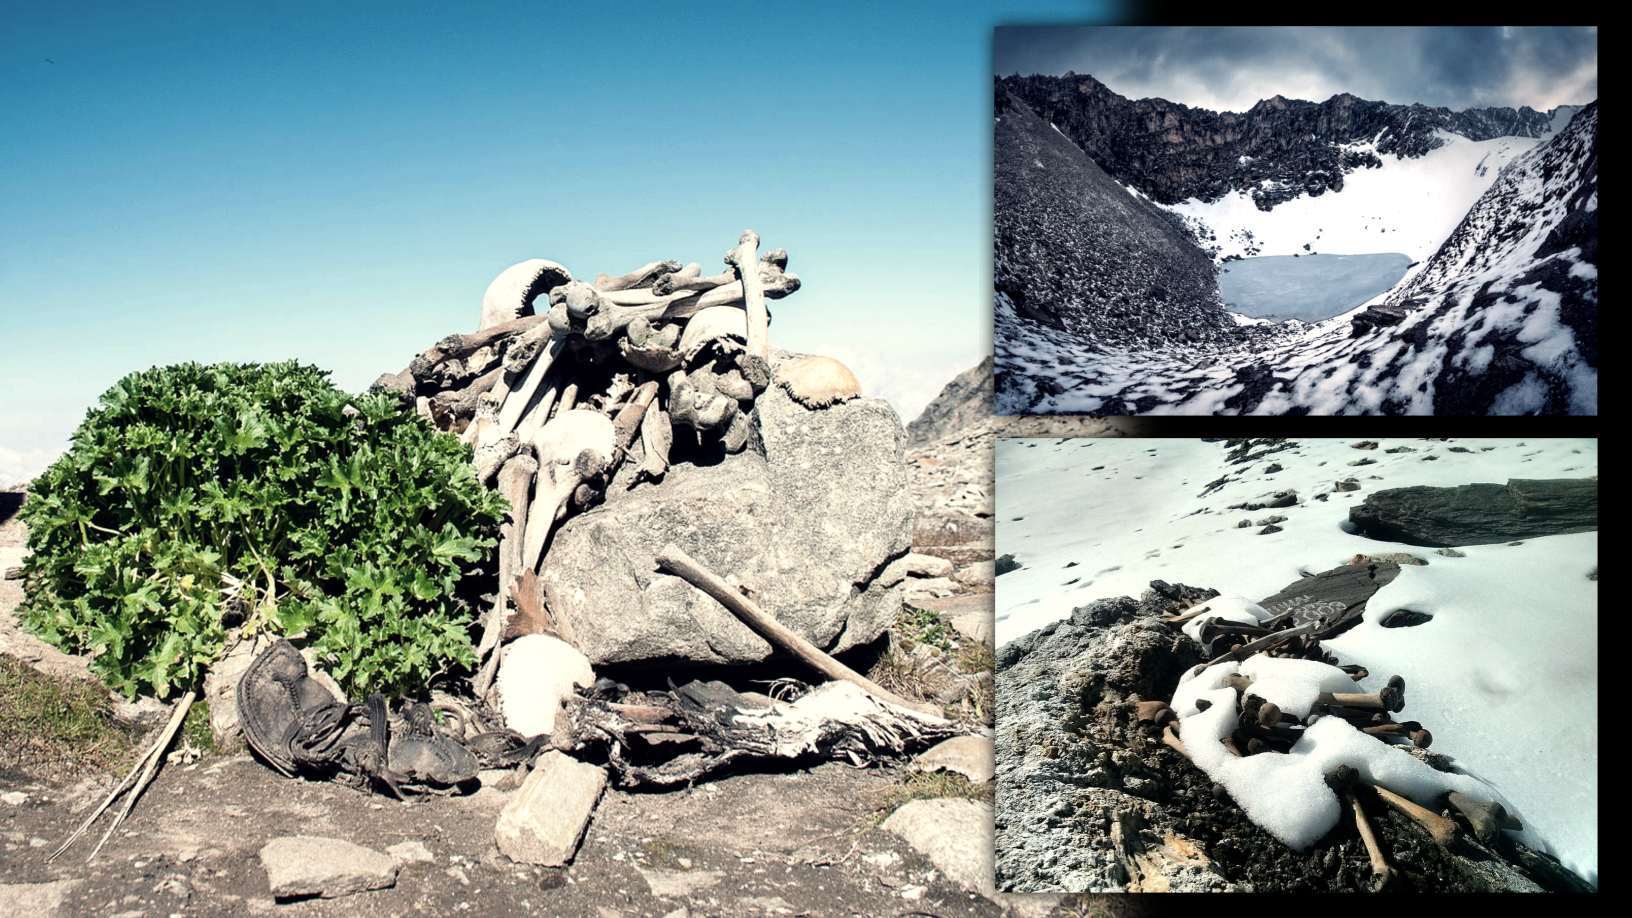 Skeleton lake: Ancient remains frozen in time in the Himalayas 2